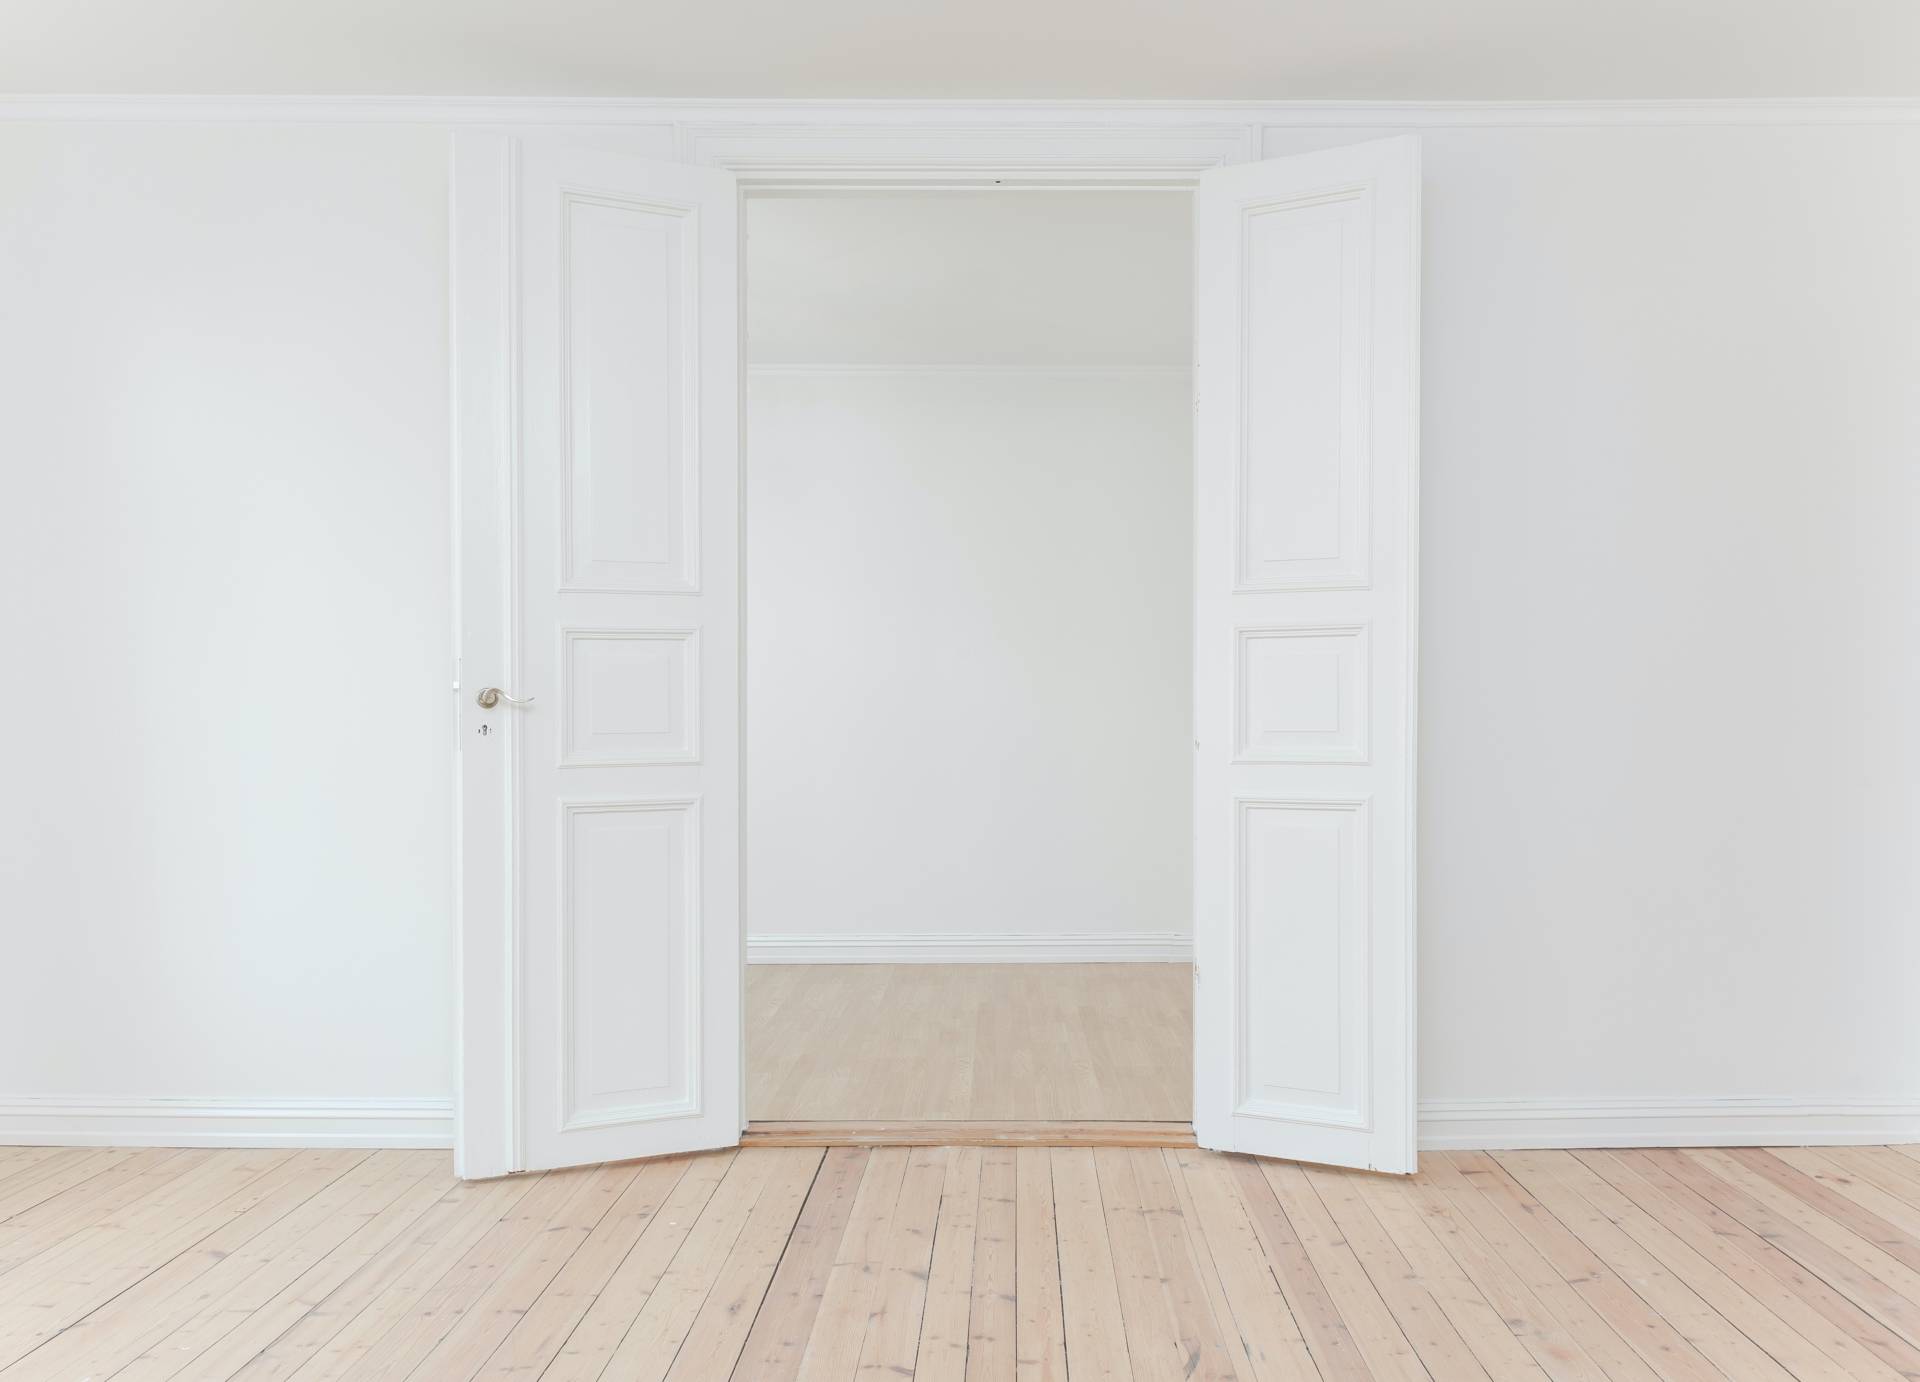 large white double doors open connecting two rooms